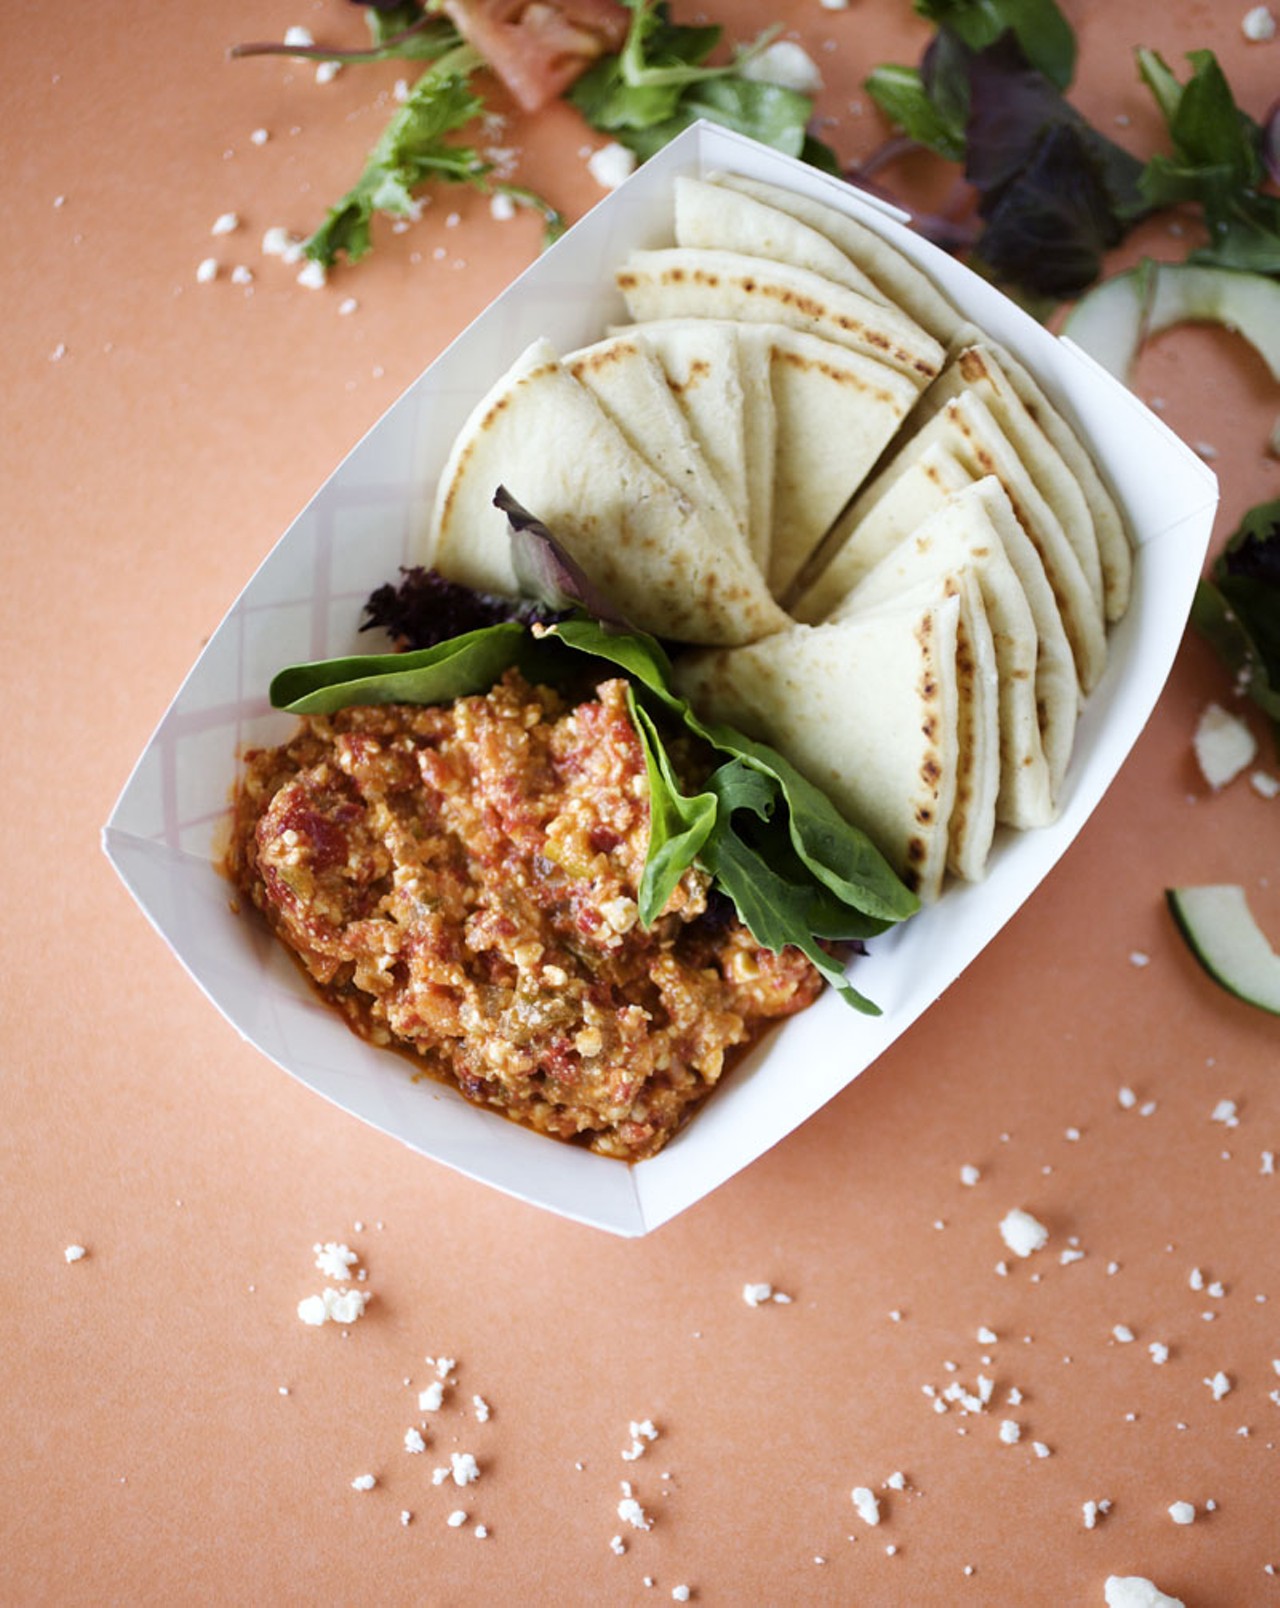 The Htipiti is a spread made with spicy roasted pepper, capers, feta cheese and olive oil.